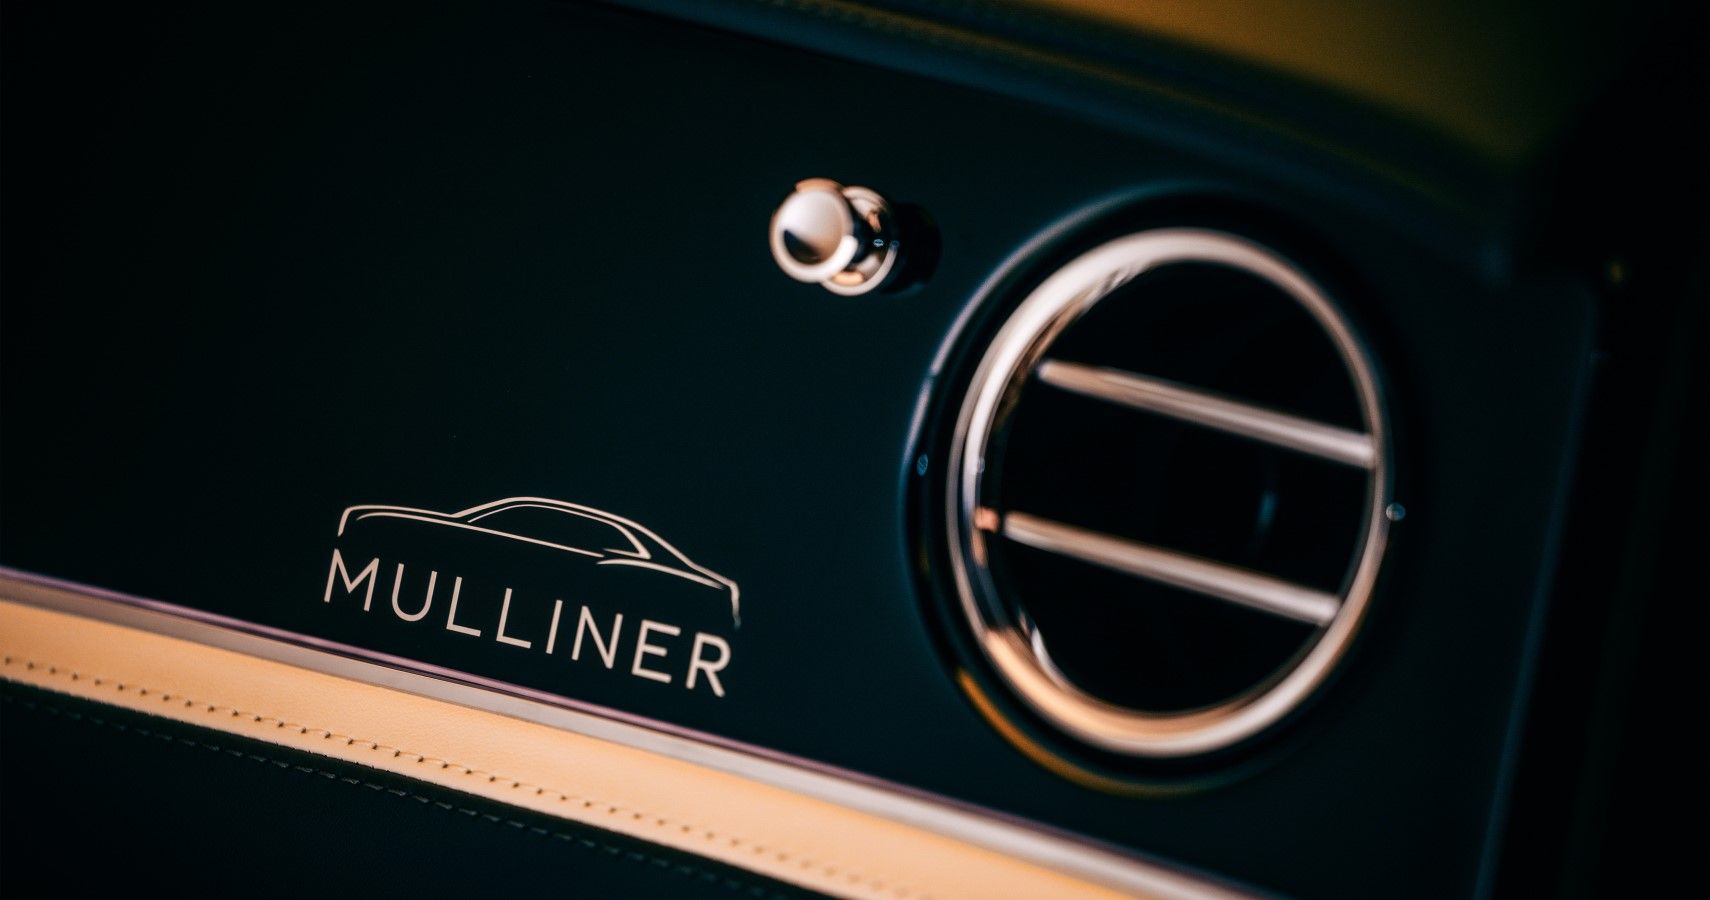 2022 Bentley Flying Spur Mulliner dashboard close-up view